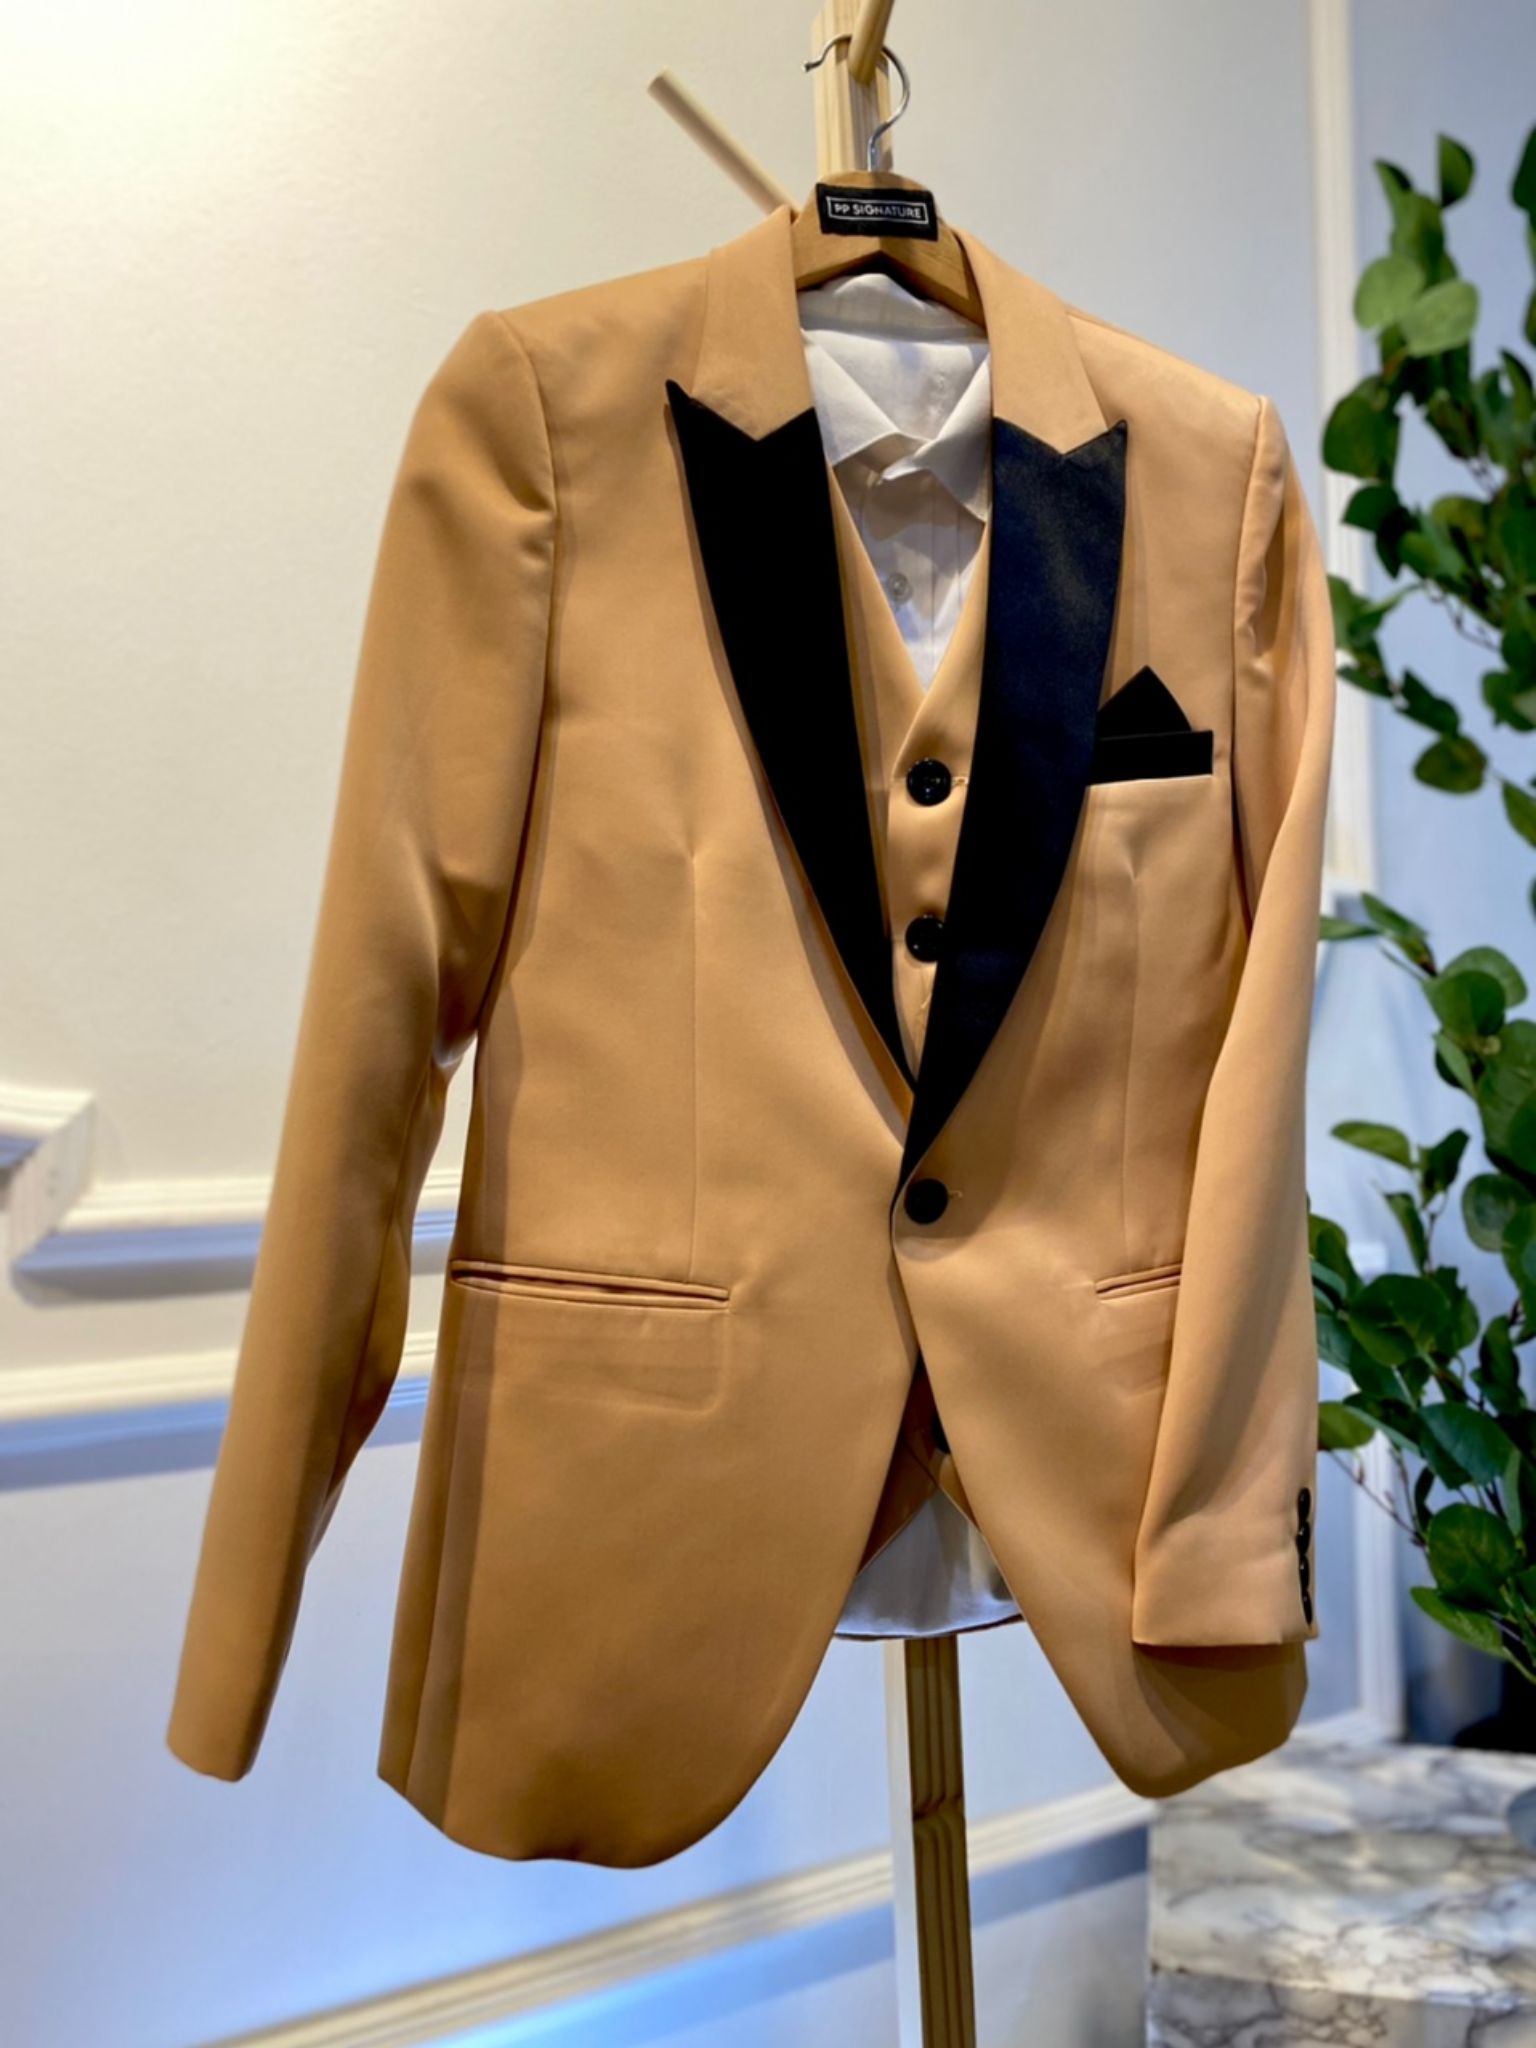 This Champagne 3 Piece Wedding Suit Brown with Black Peak lapel tuxedo jacket is the perfect choice for any formal occasion. Made from high-quality duchess fabric, it is both stylish and comfortable. The jacket features a classic single-breasted design with a peak lapel and satin trim. It also has two side pockets and one breast pocket. This jacket is available in a variety of sizes to fit all body types.